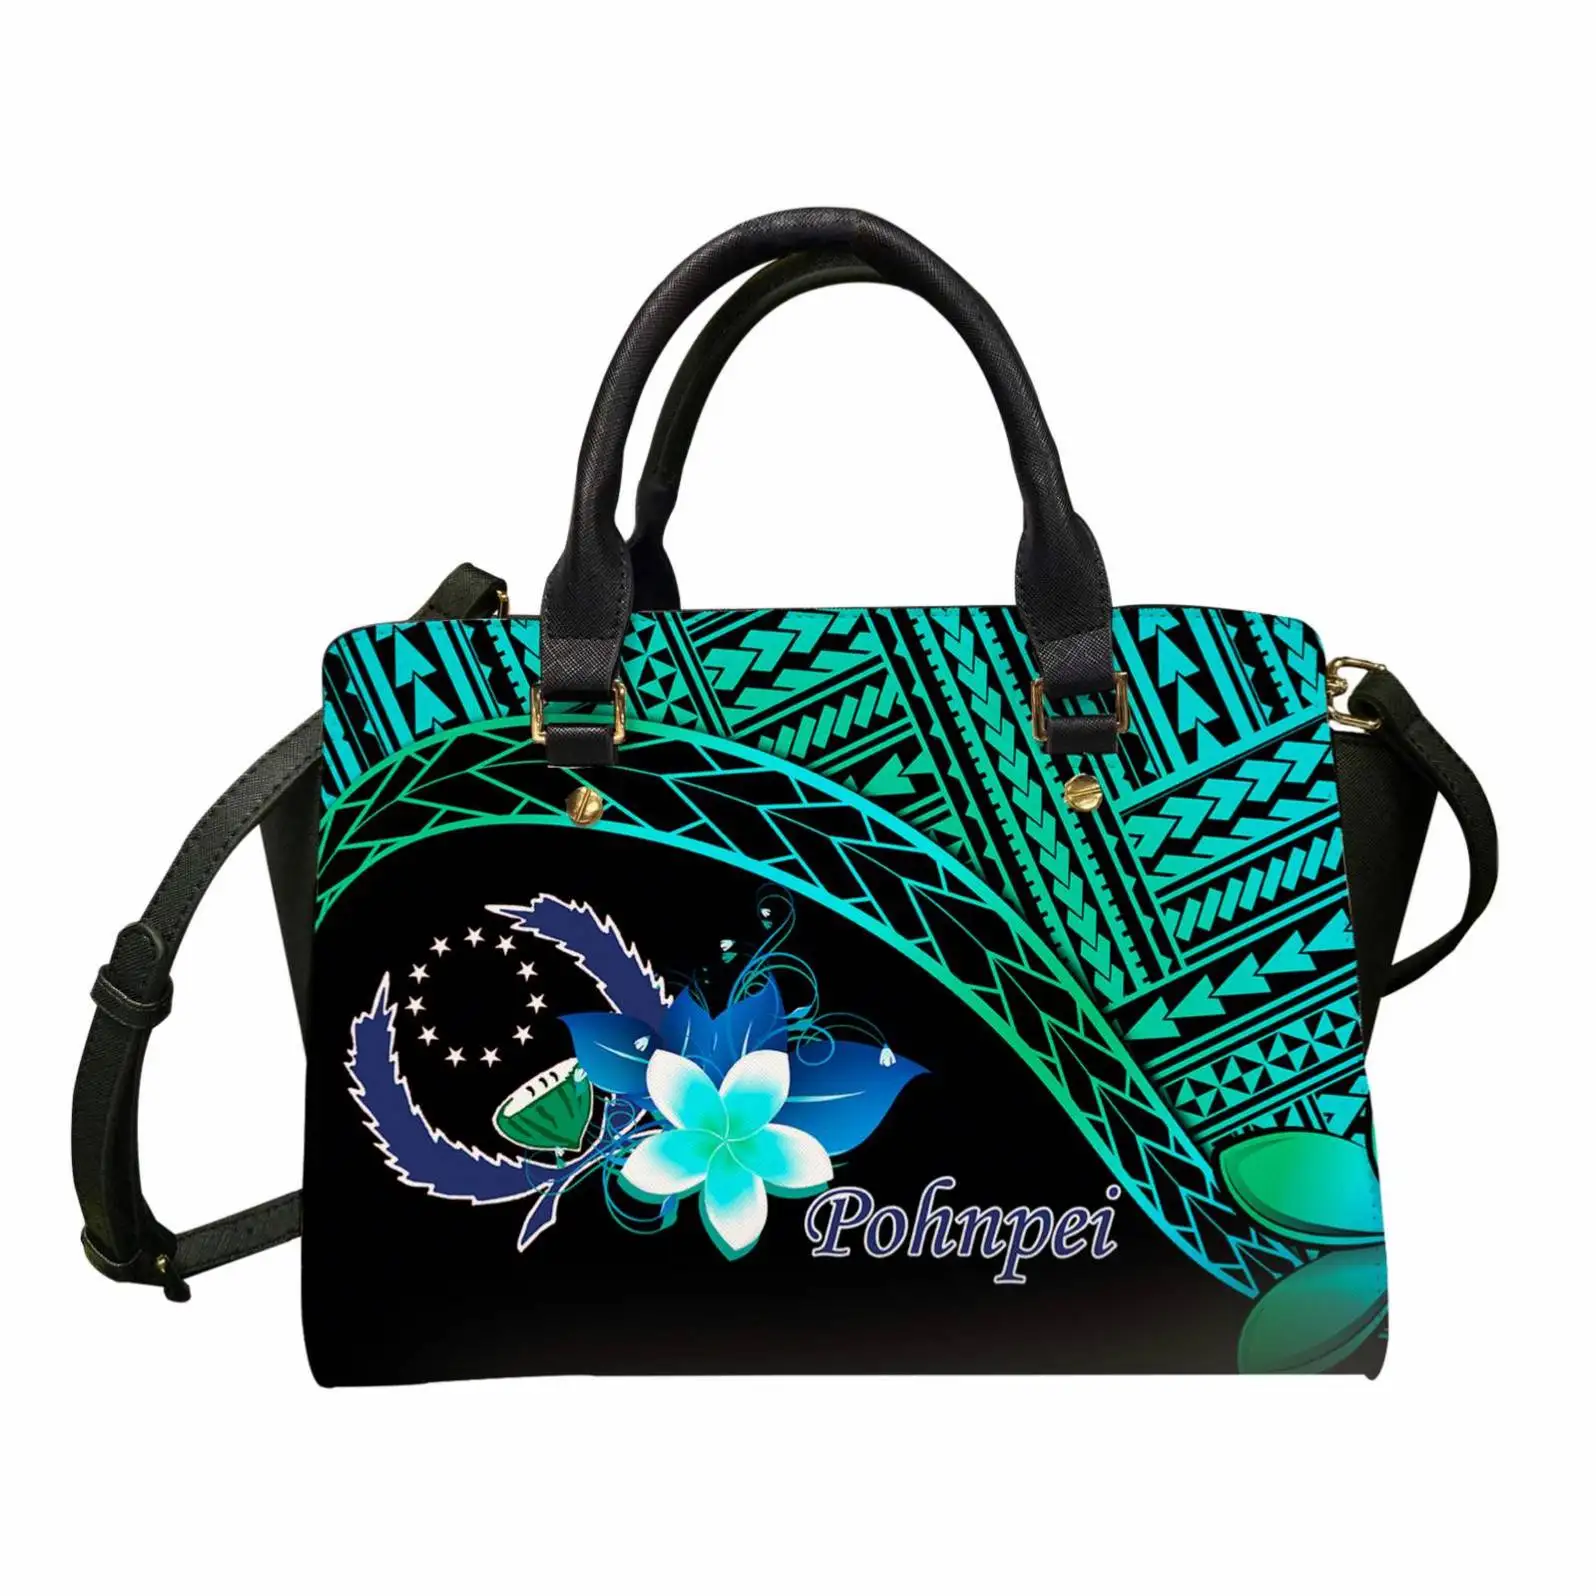 

Pohnpei Plumeria And Tribal Tattoo Of Polynesian Printed Hhandbags for Women Luxury Leather Satchel Purse Shoulder Bag Turquoise, Accept custom made